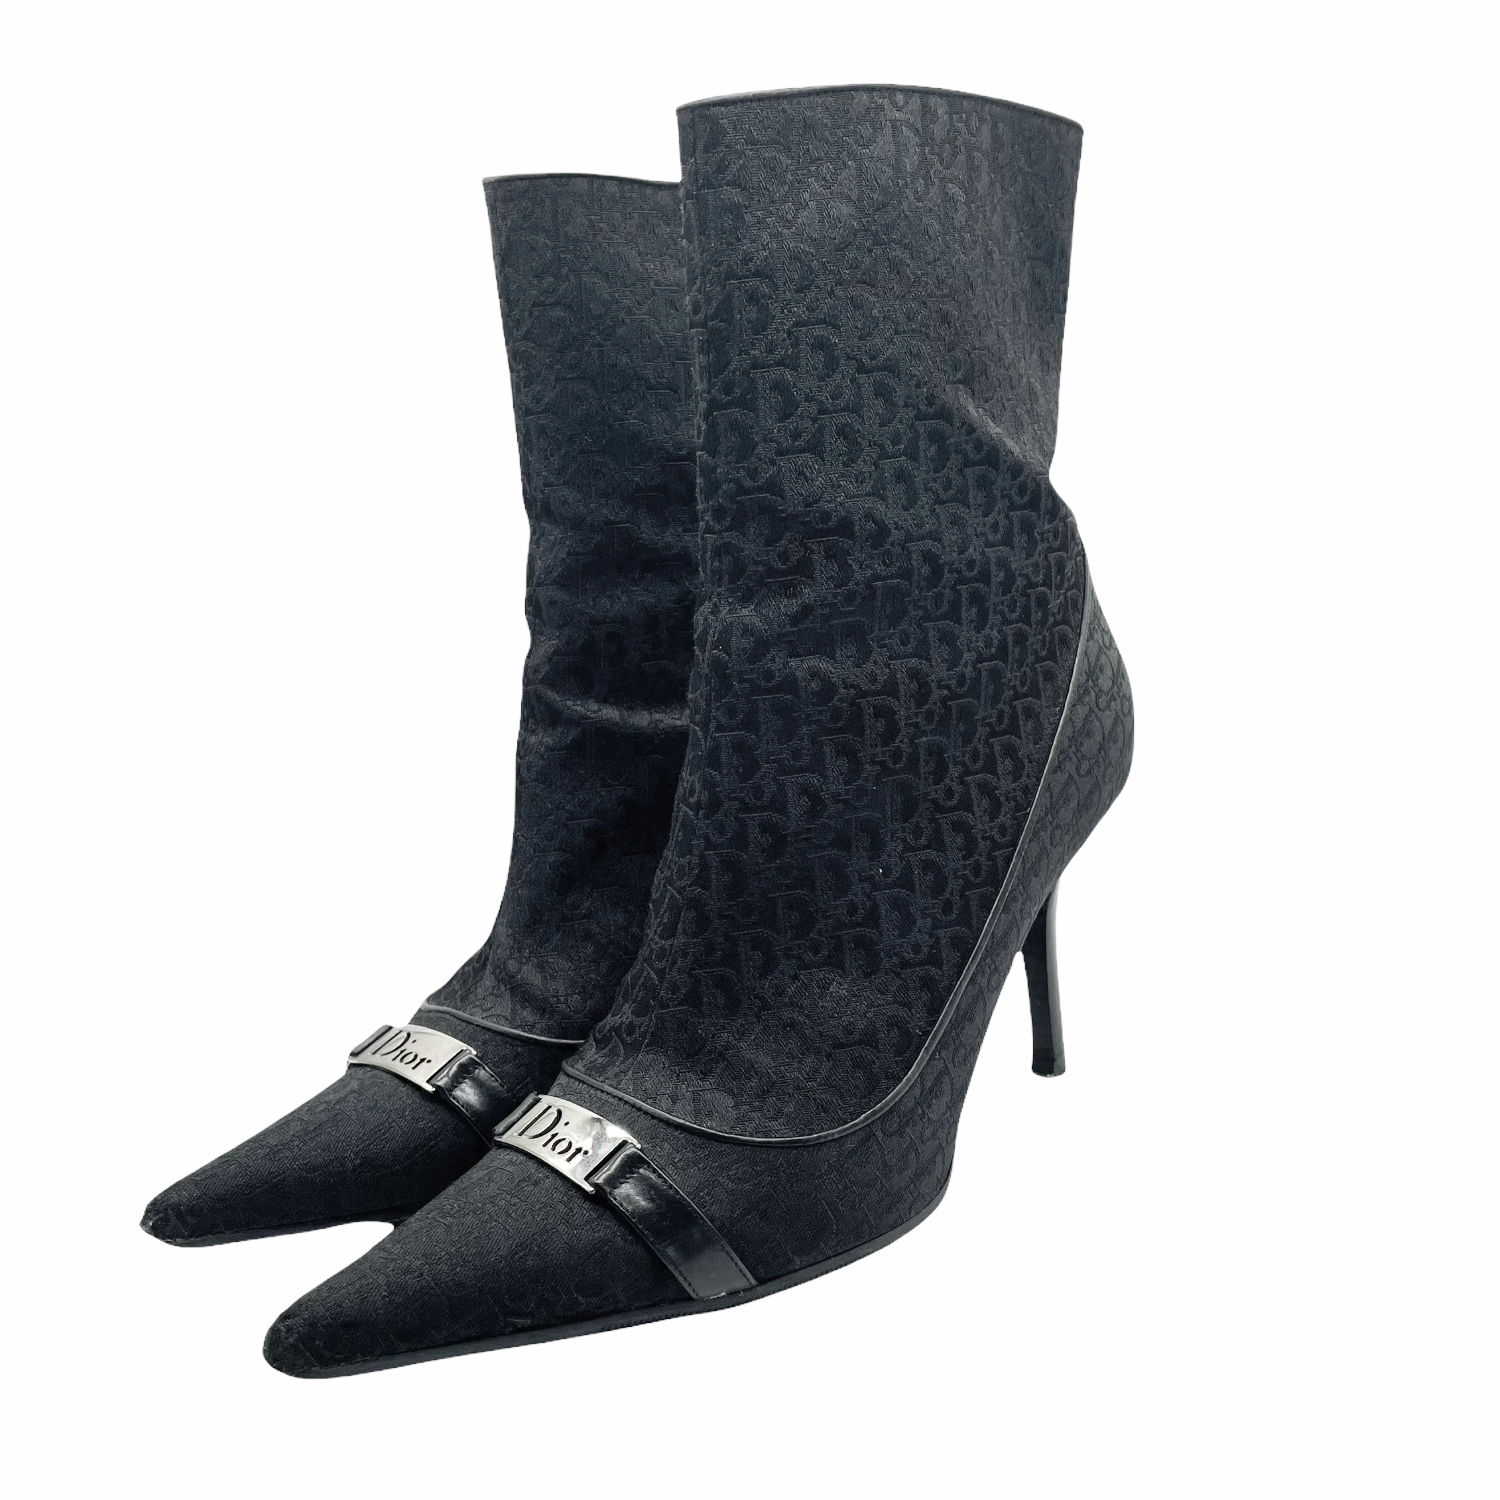 Vintage Dior Monogram Spellout Heeled Boots in Black and Silver | NITRYL